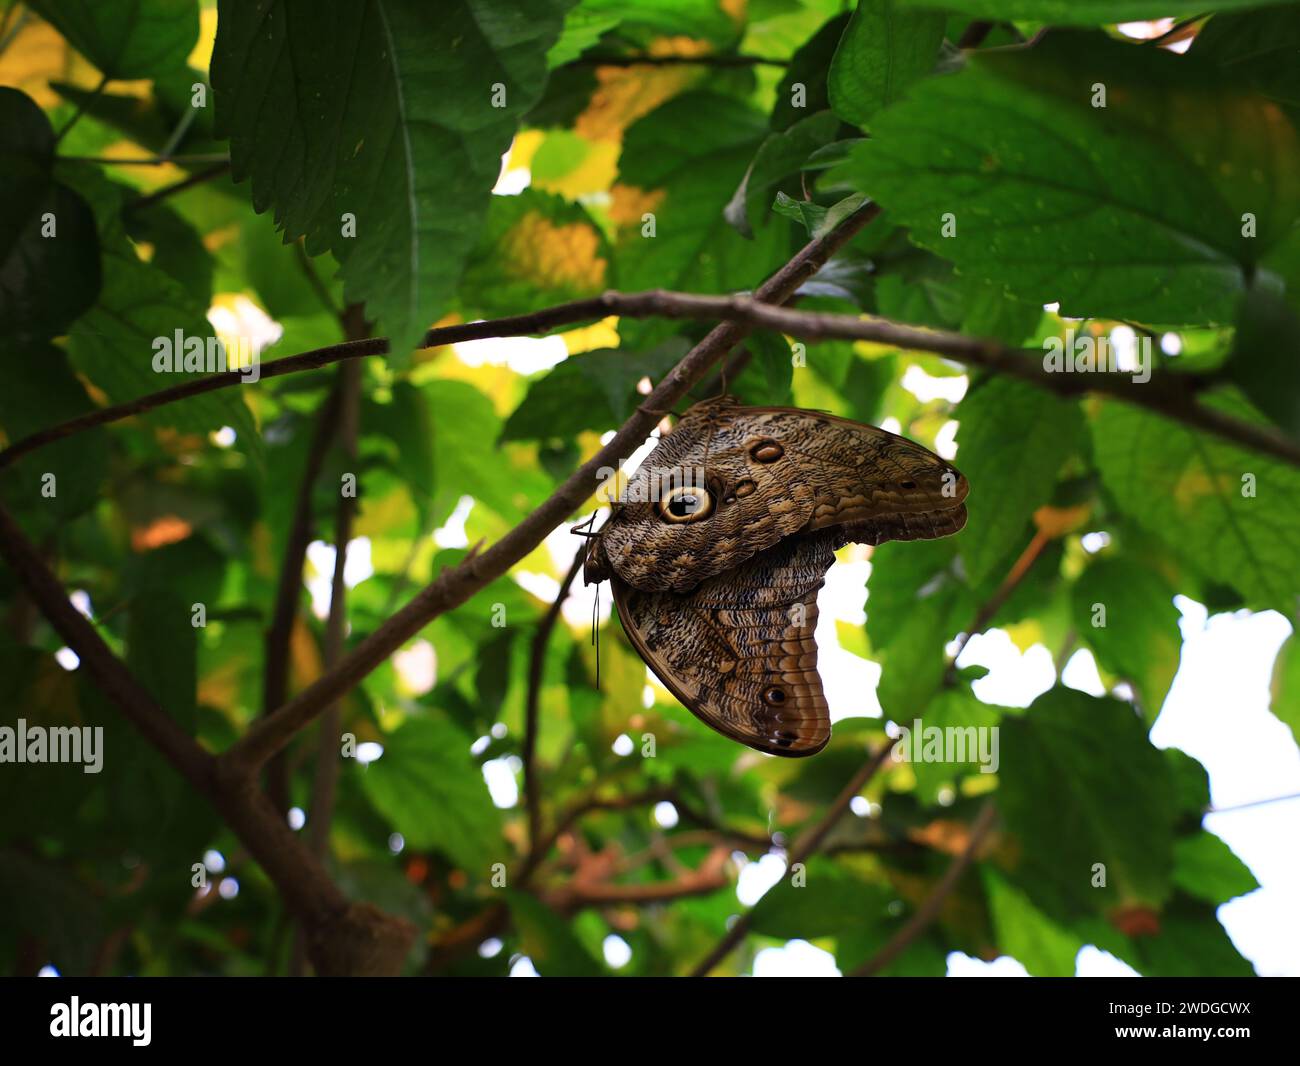 View on a butterfly in the Butterfly Greenhouse located in Queue-Lez-Yvelines Stock Photo